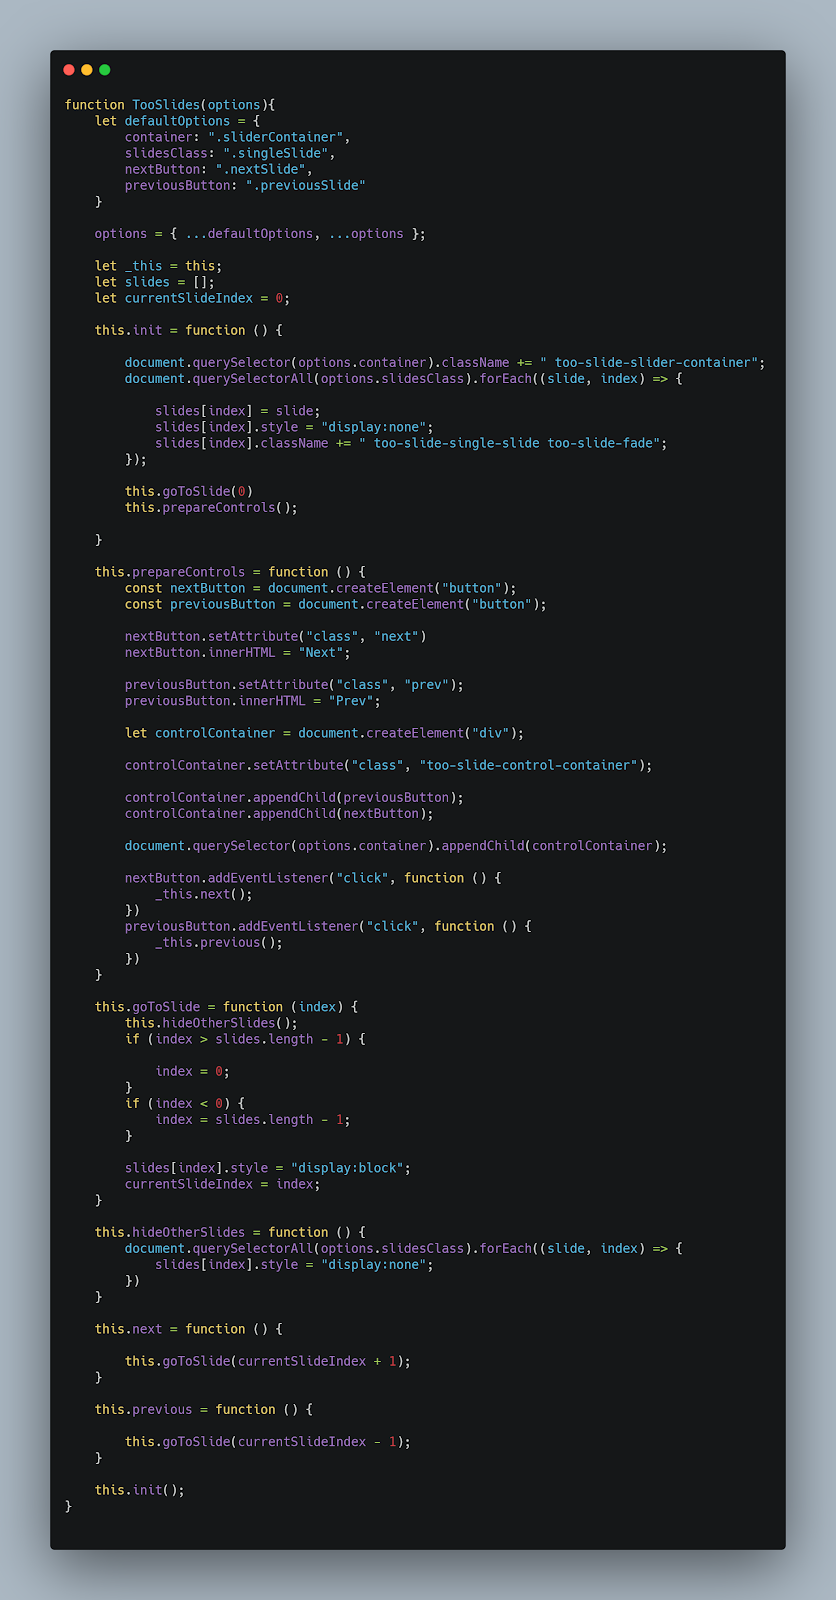 Our final code snippet.